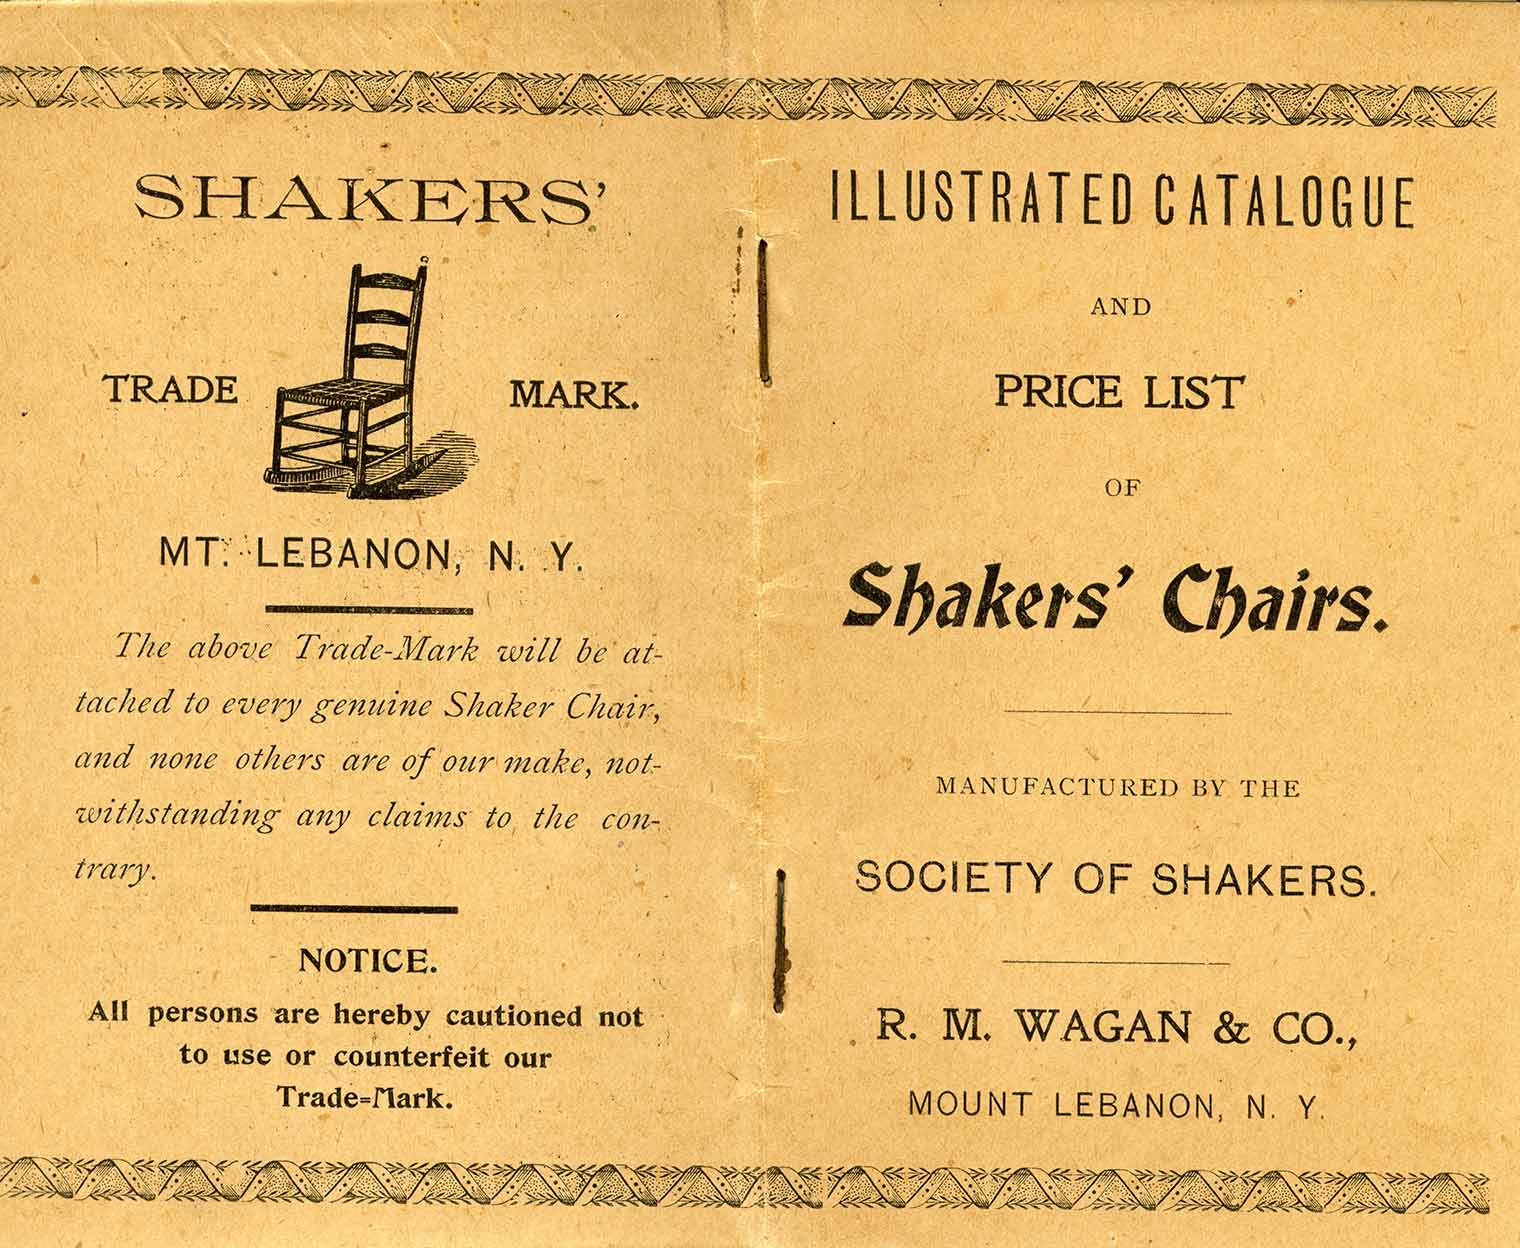 Front and back cover of Illustrated Catalogue and Price List of Shaker Chairs, ca. 1880